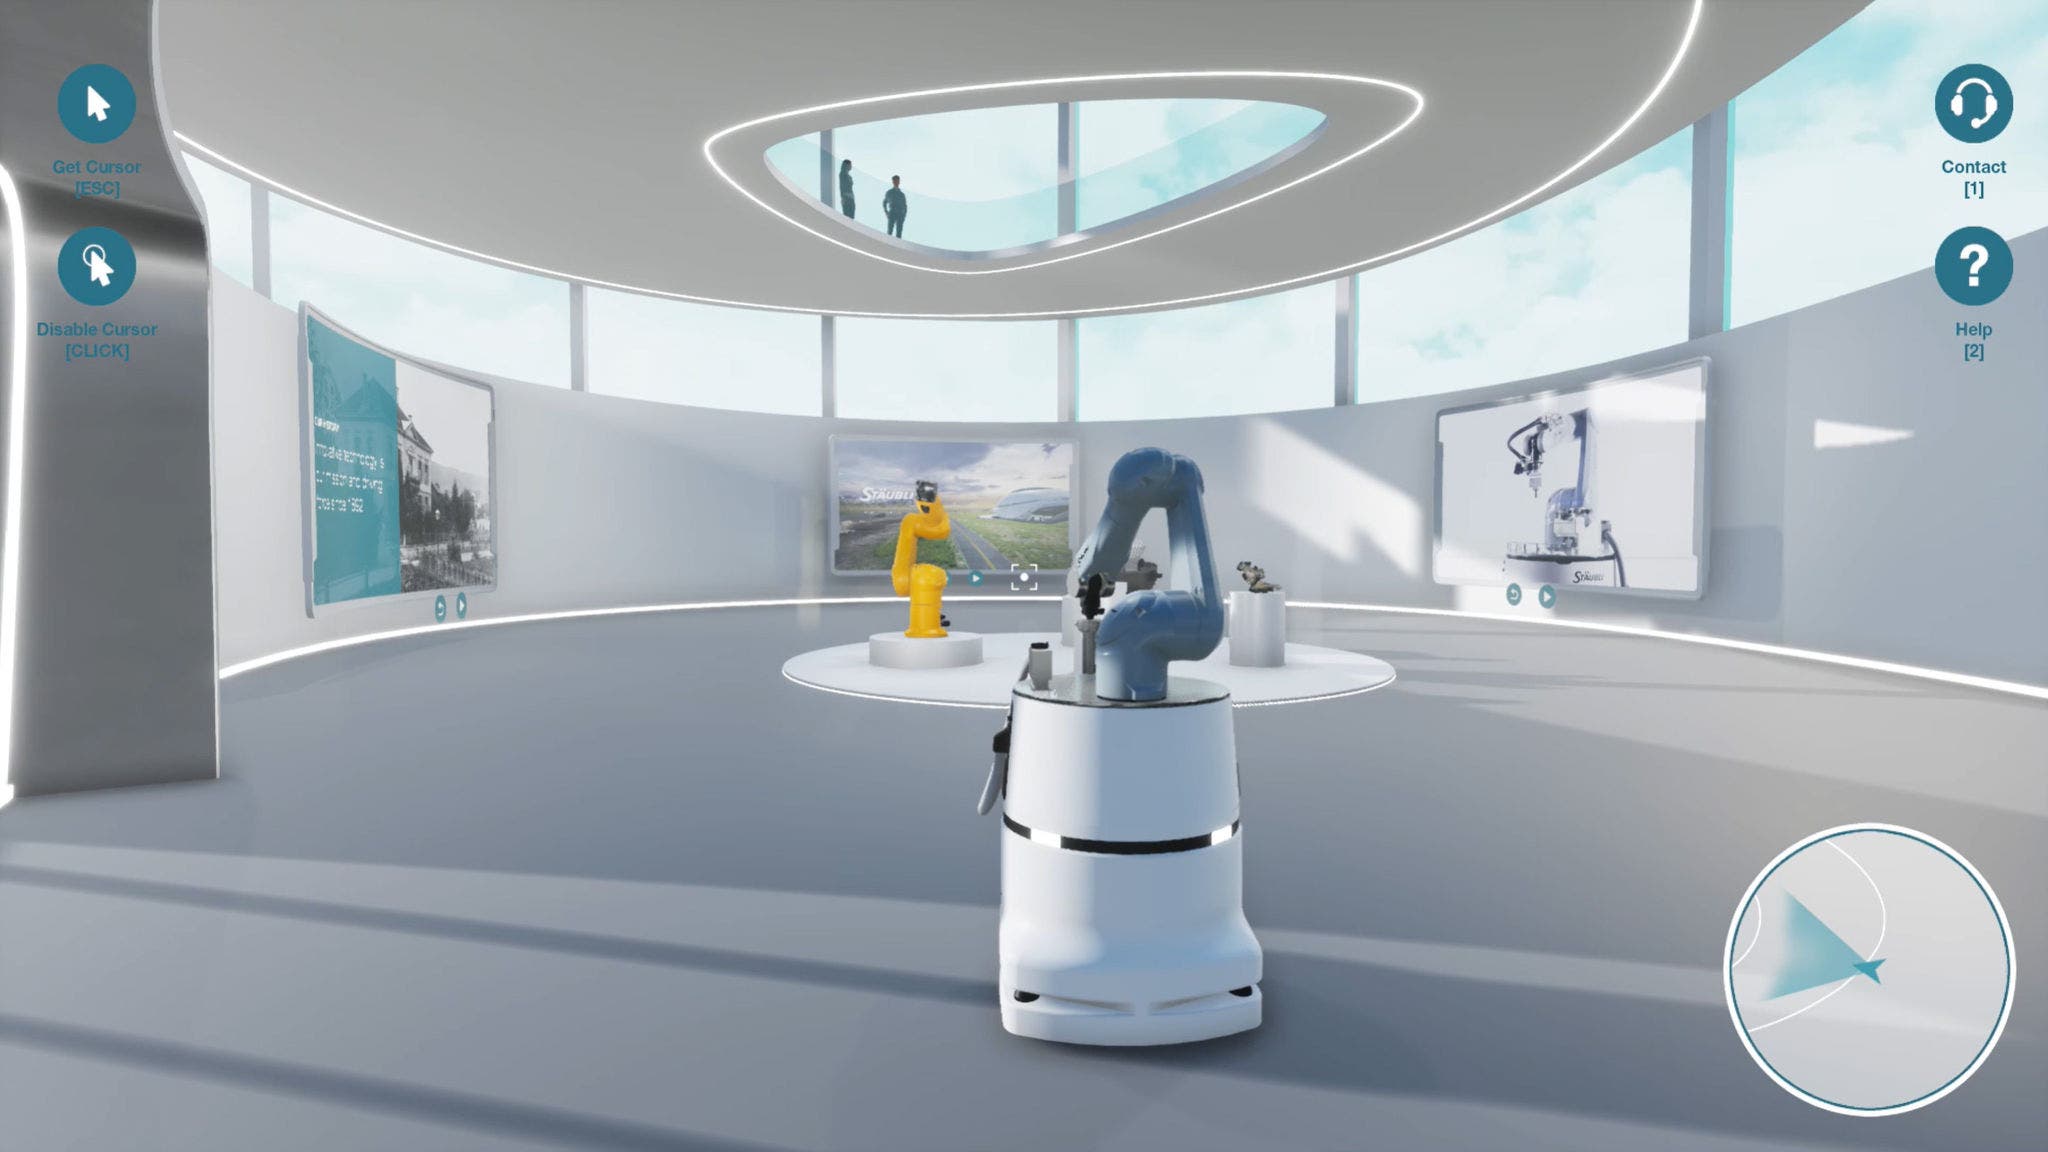 Stäubli Home of Innovation (HOI) showcases our innovative technologies in a multi-dimensional virtual experience.